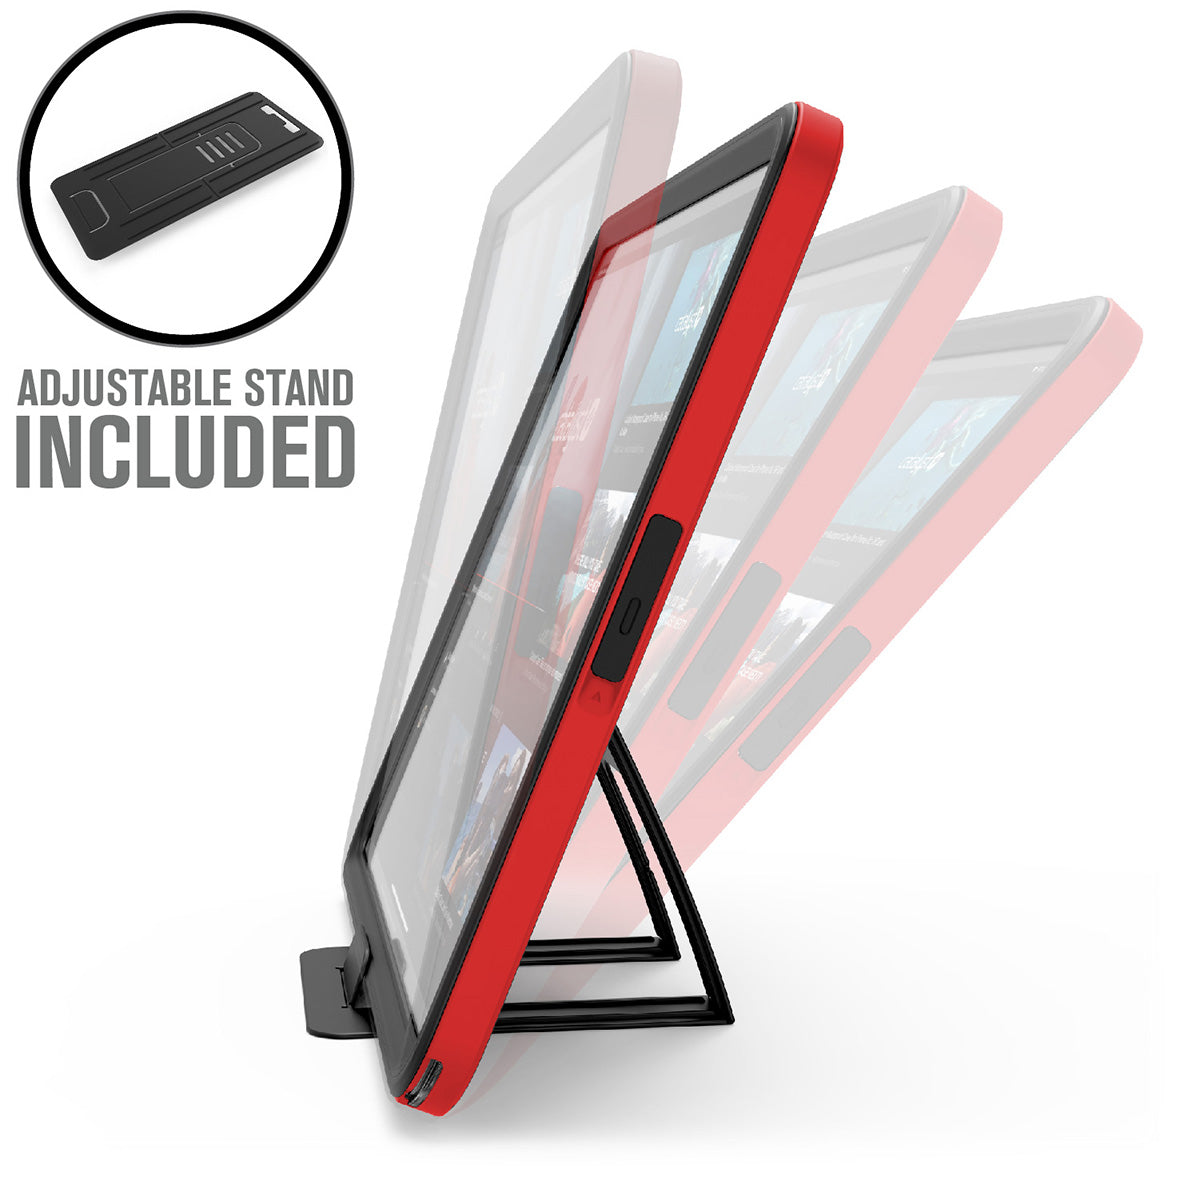 Catalyst waterproof case for ipad pro gen 3 12.9in red side view with adjustable stand Text reads adjustable stand included